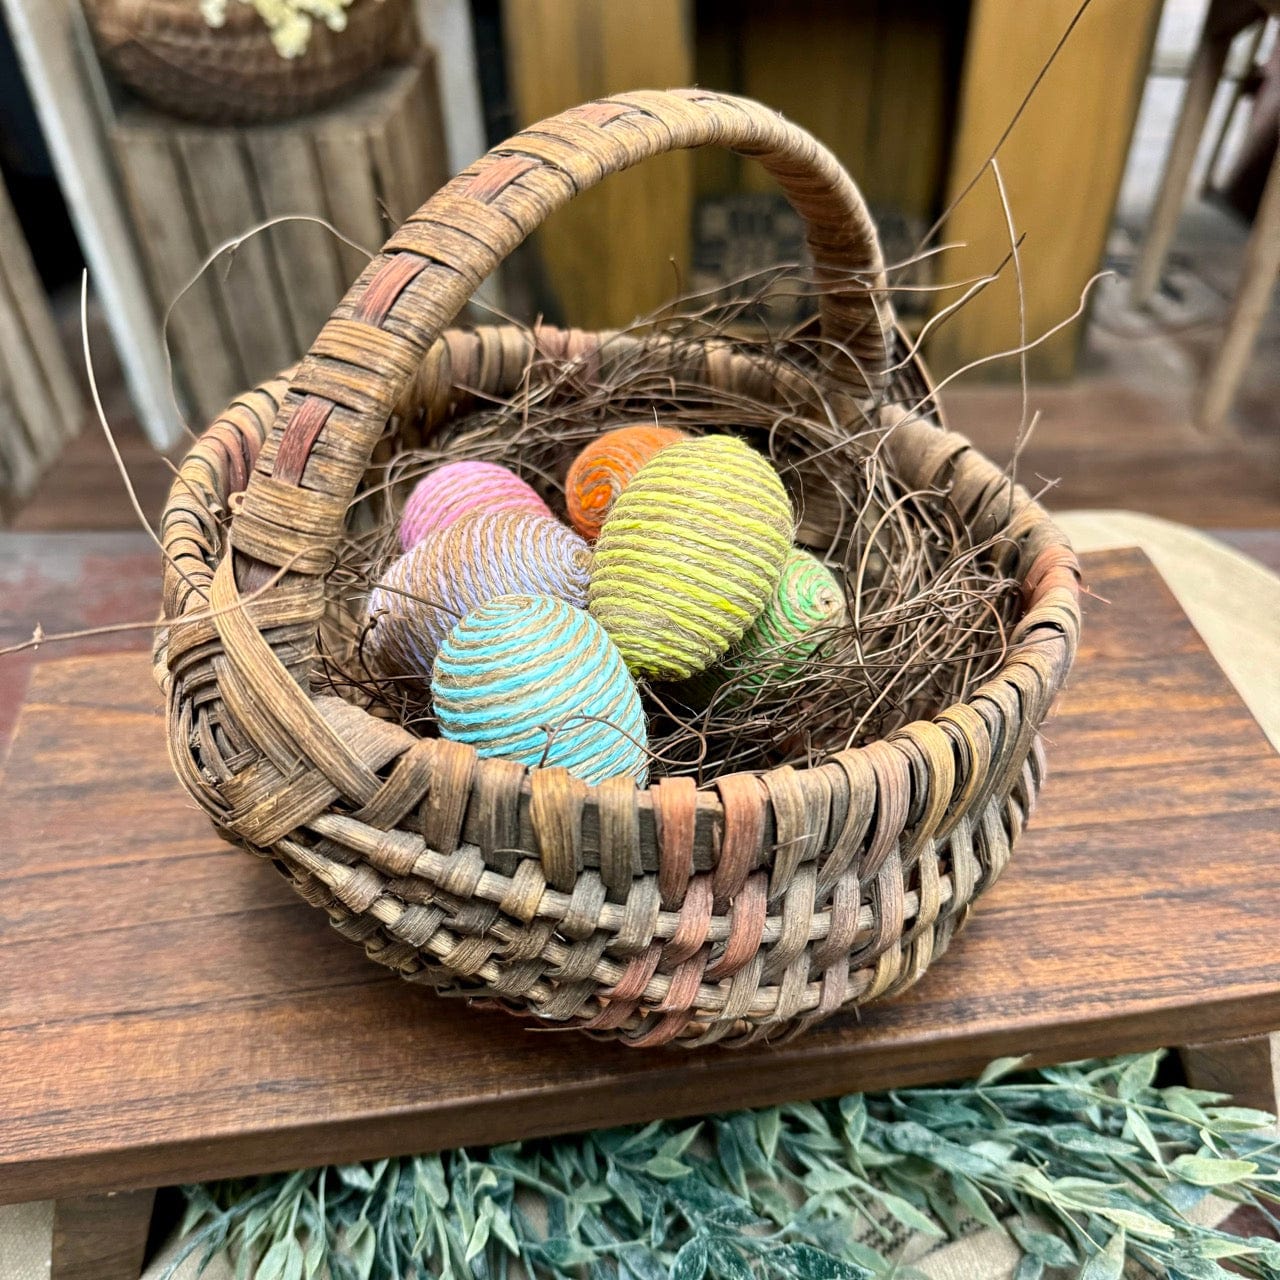 Twine Colored Eggs - Set of 6 Decor, Easter Eggs, Farmhouse Decorating, Farmhouse Spring Decor, Farmhouse Spring Decorating, New, Spring Decor, Spring Decorating, Spring Farmhouse Decor, Spring Home Decor 